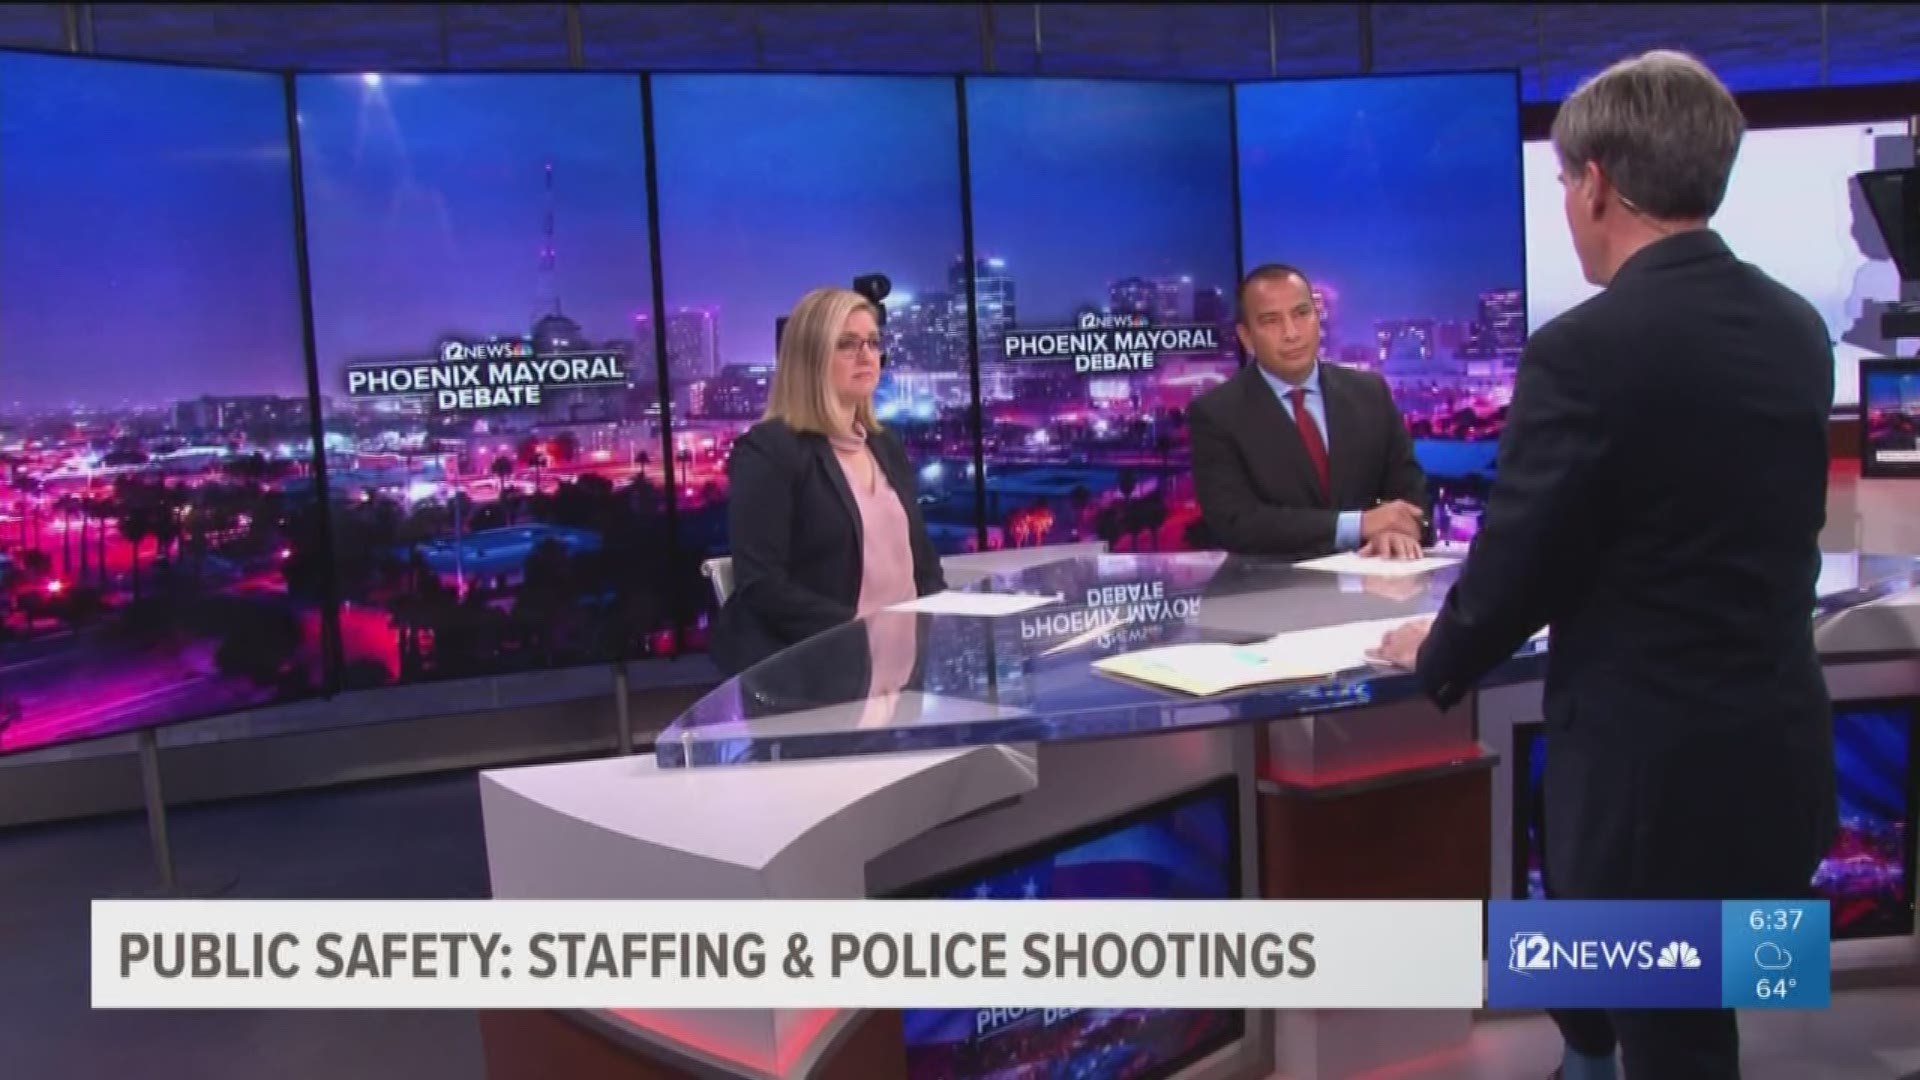 The Phoenix mayoral candidates discuss public safety issues, including police staffing and technology to curtail crime and police shootings.